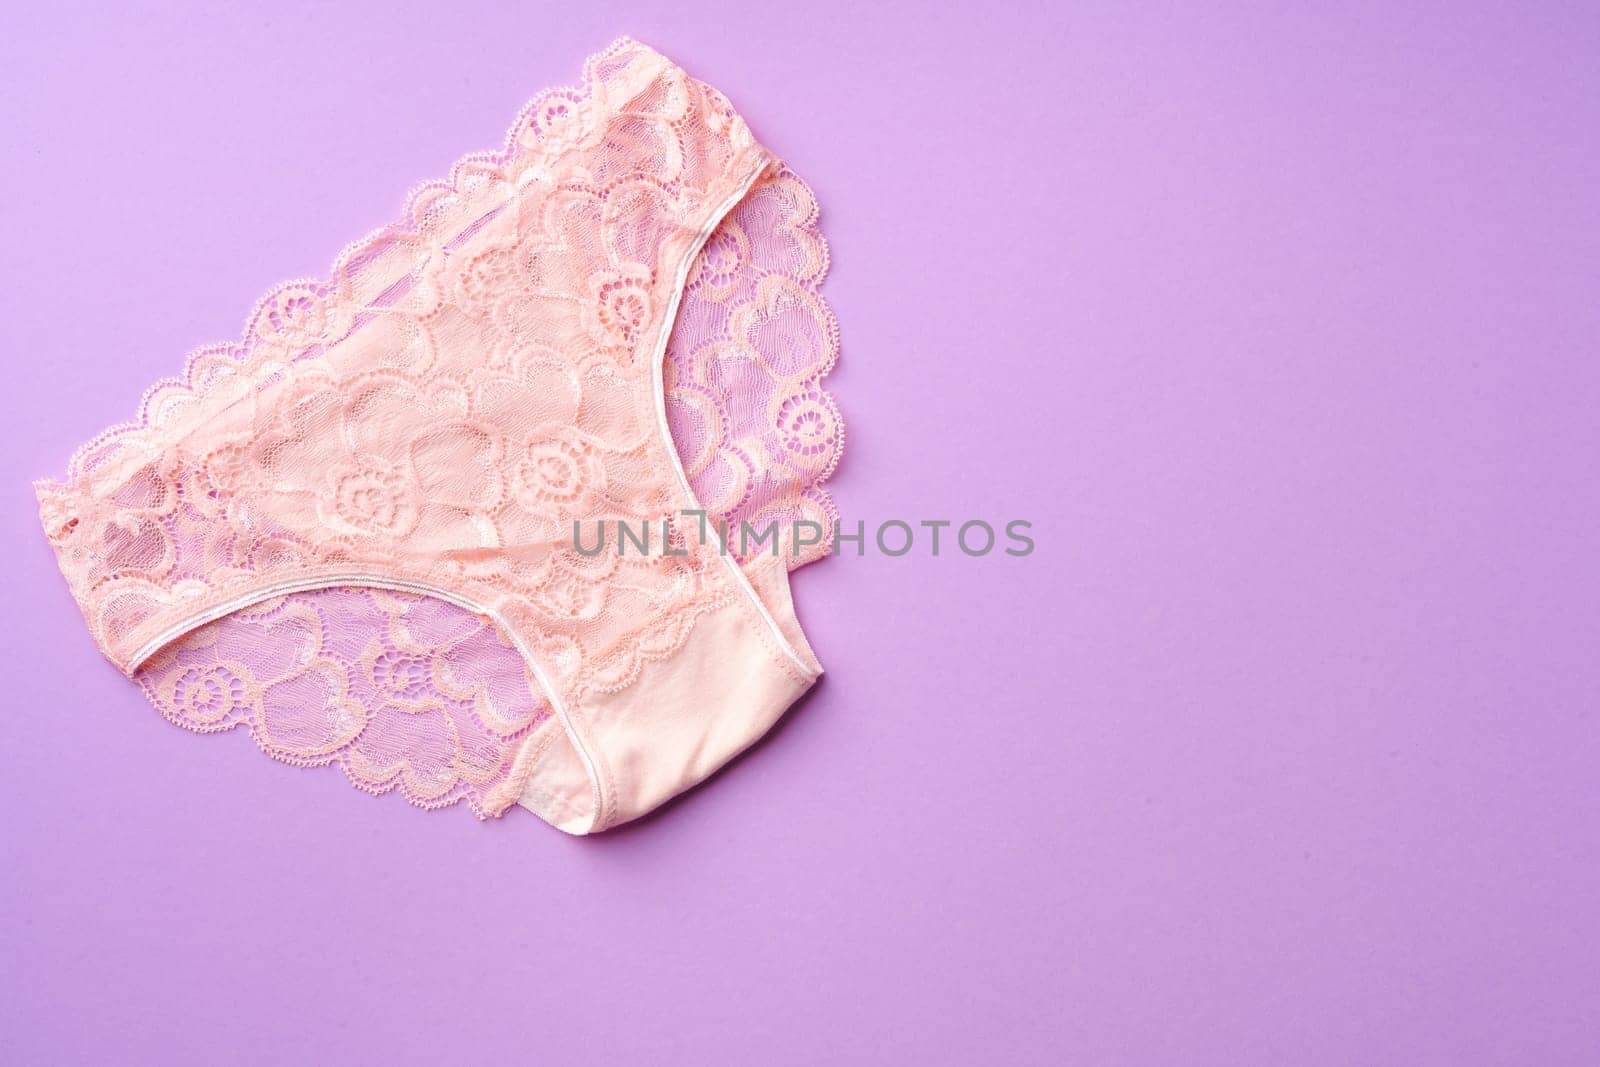 Women's panties on pink background with copy space flat lay